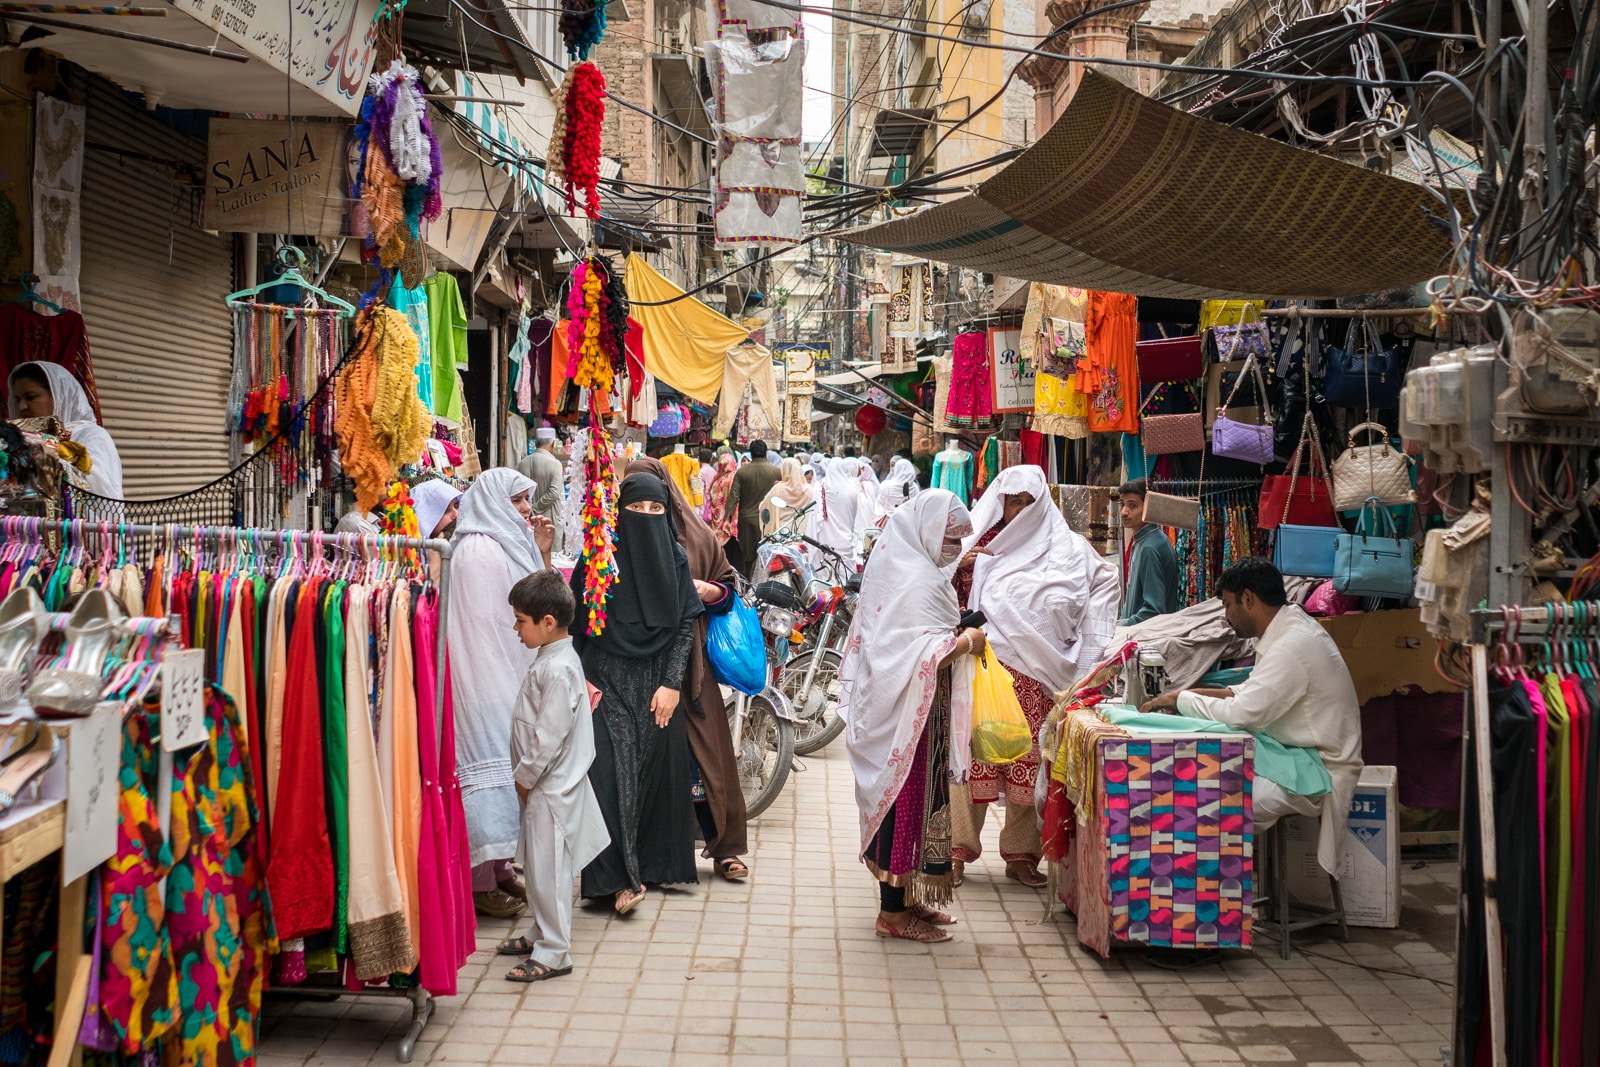 Ladies shopping for clothes in a bazaar in Peshawar, Pakistan